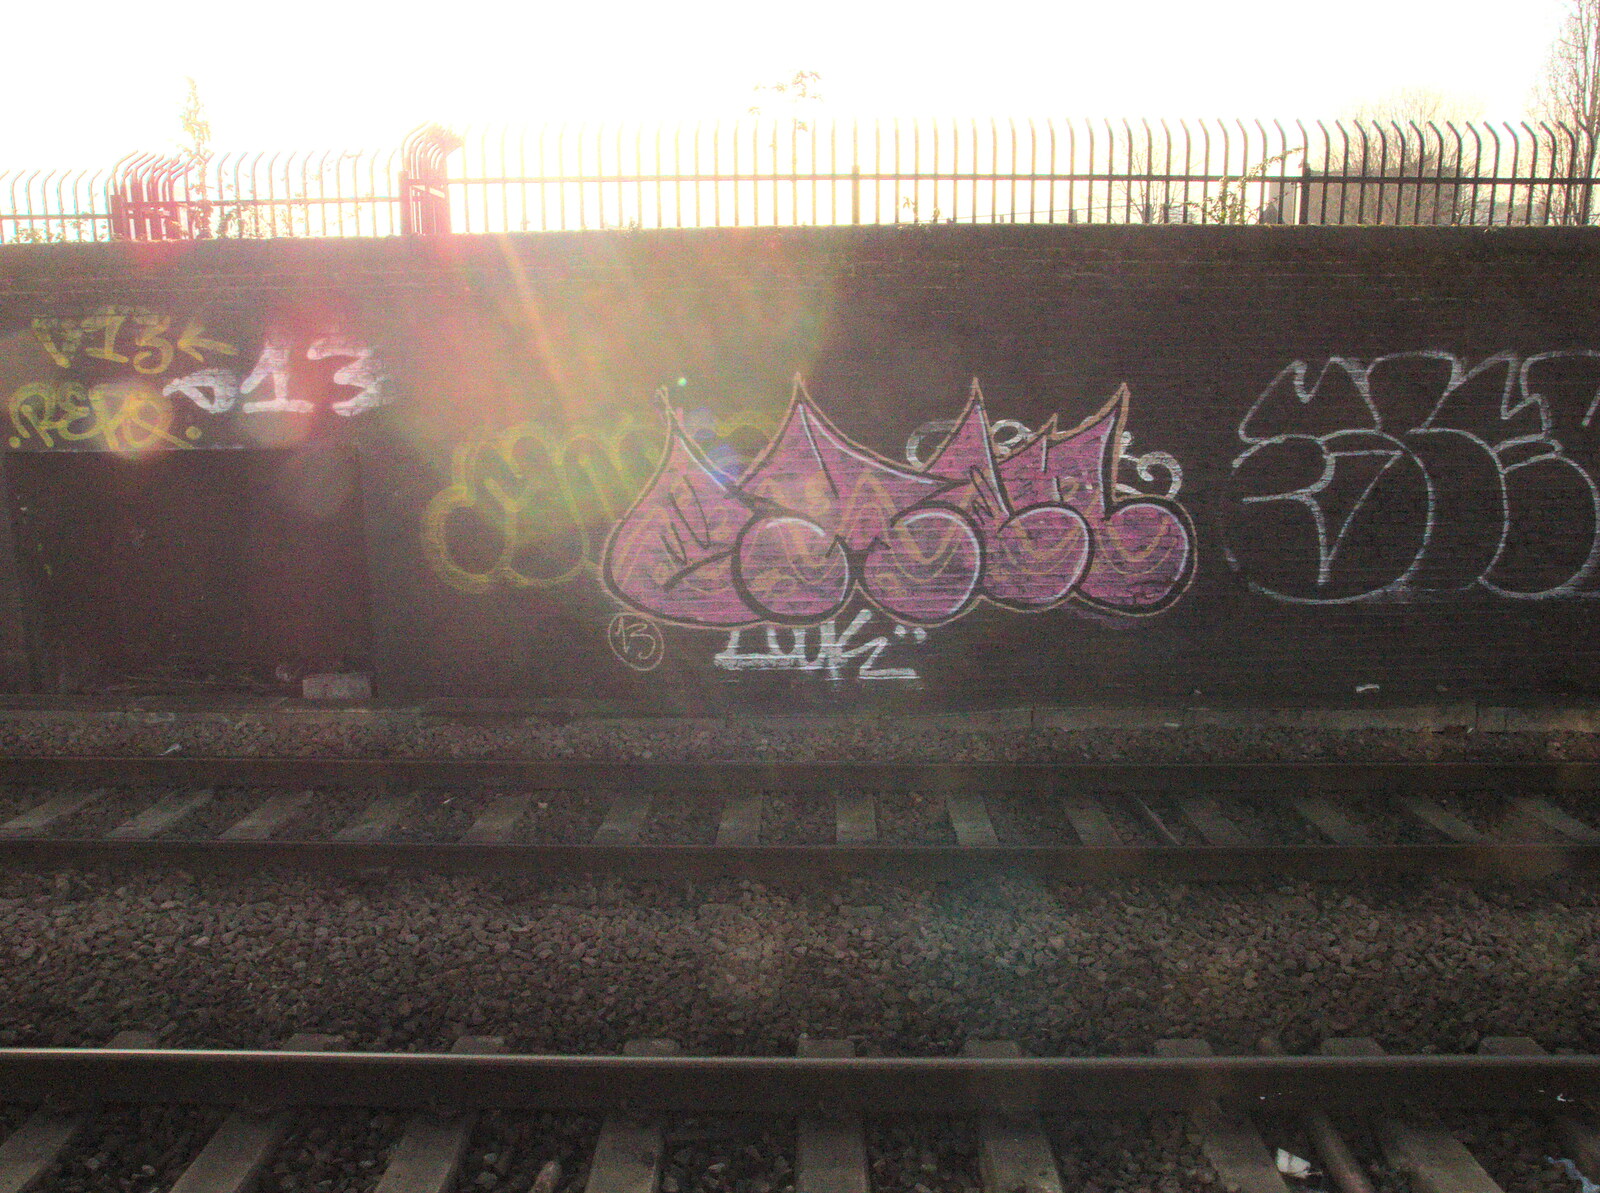 The sun shines on pink graffiti from Fred and the Volcano, Brome, Suffolk - 8th February 2015